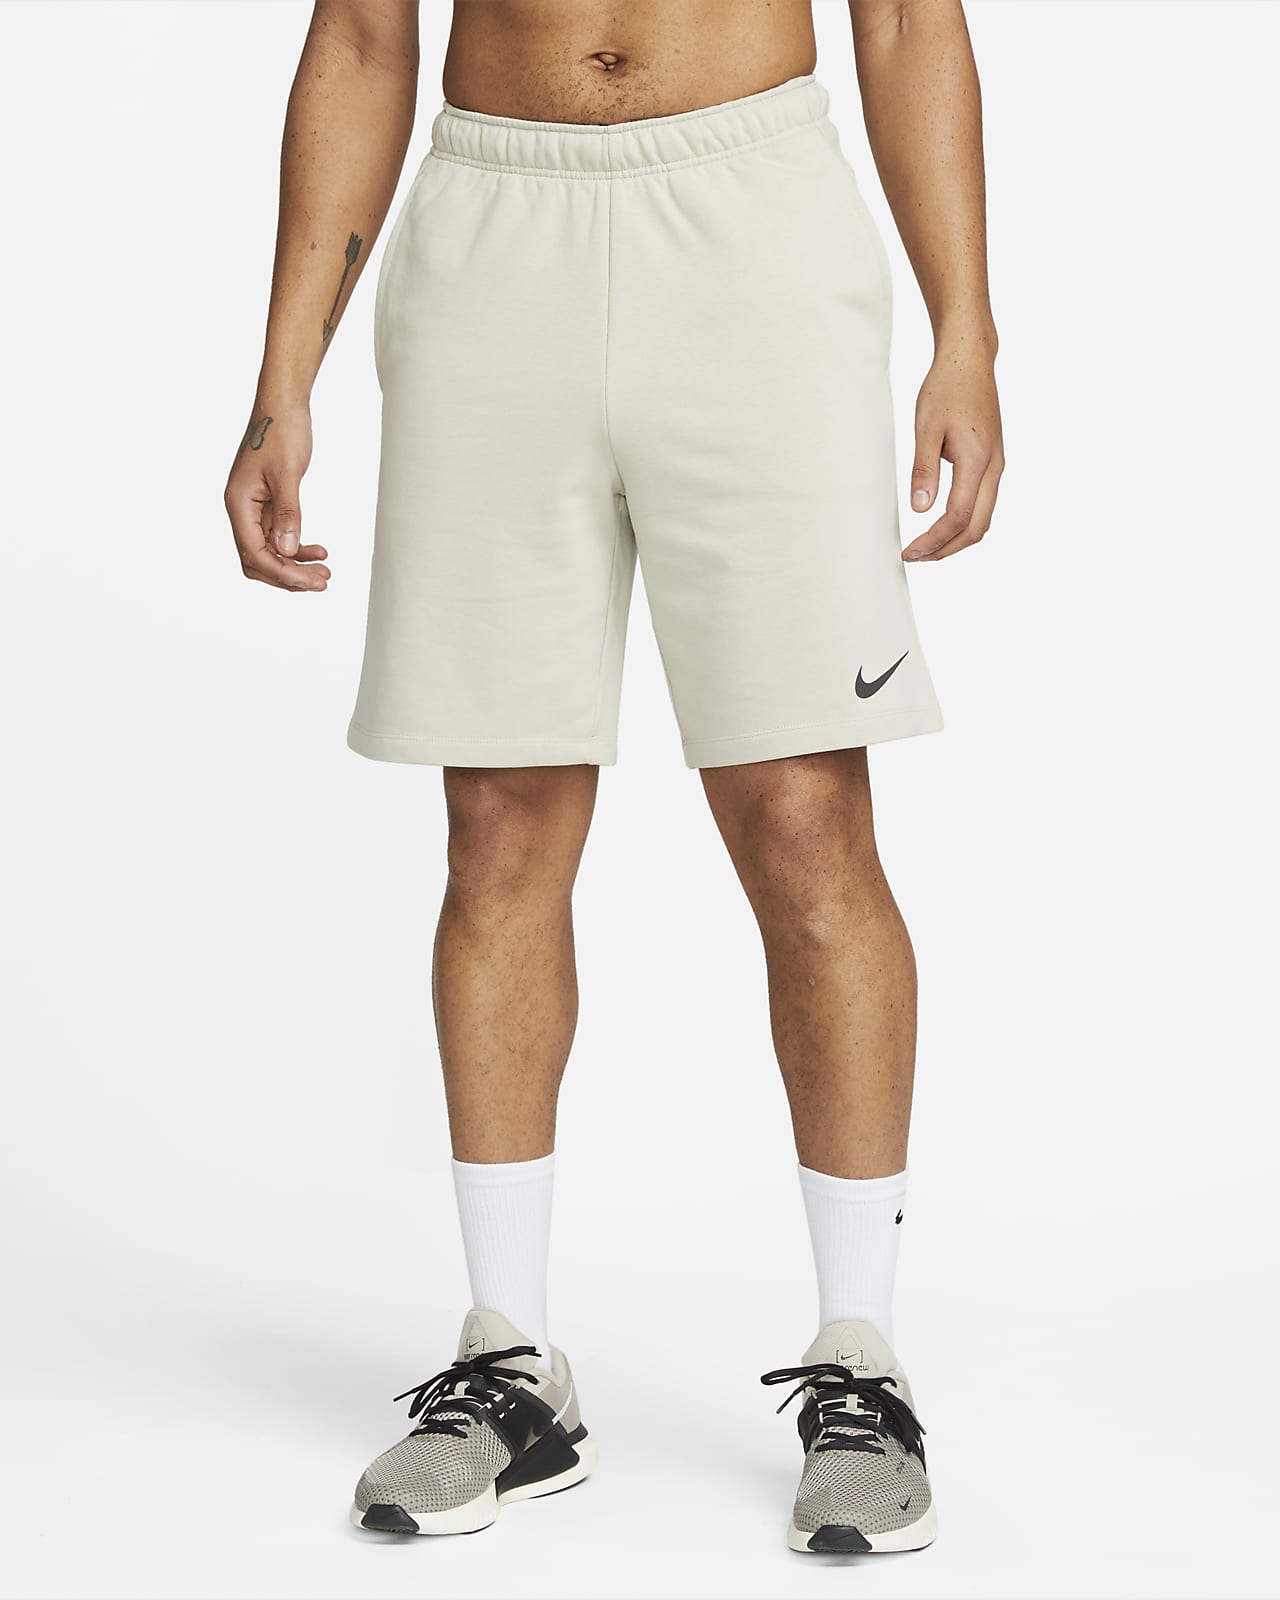 Under Armour Mens Forge 7 Tennis Shorts 